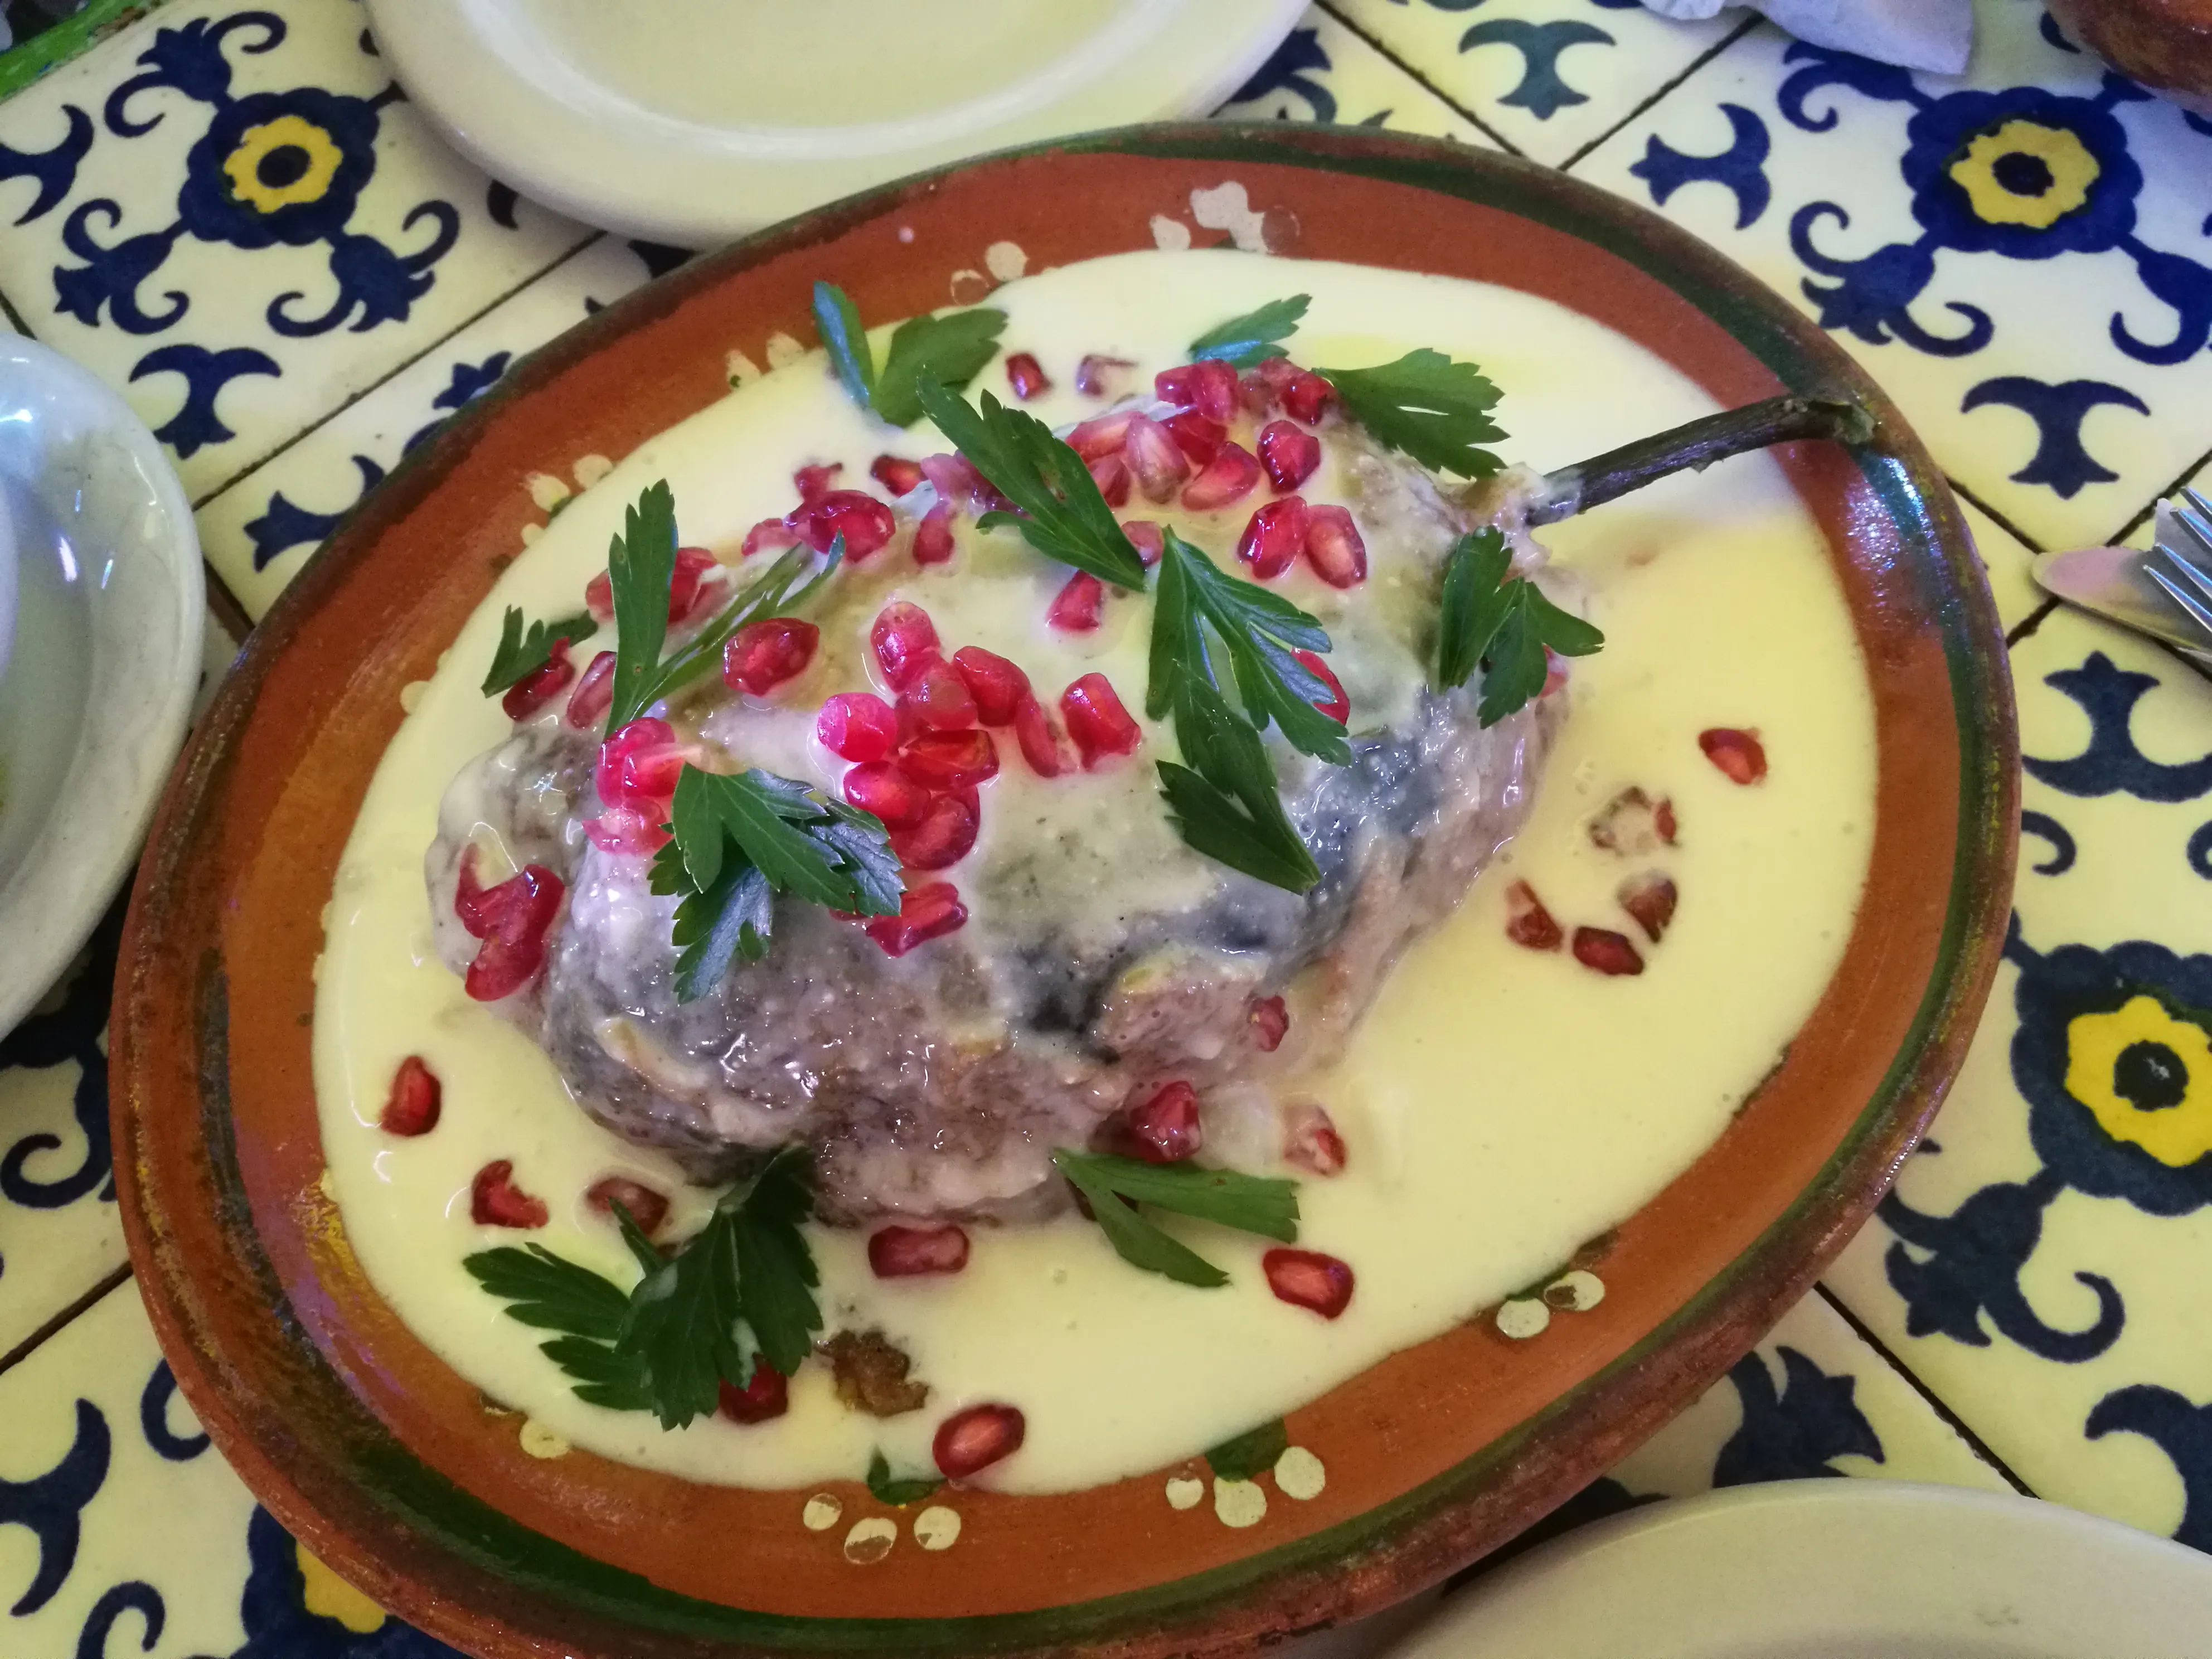 Chile en Nogada are stuffed poblano peppers in walnut sauce. The dish represents the colors of the Mexican flag and is traditionally eaten around independence day.